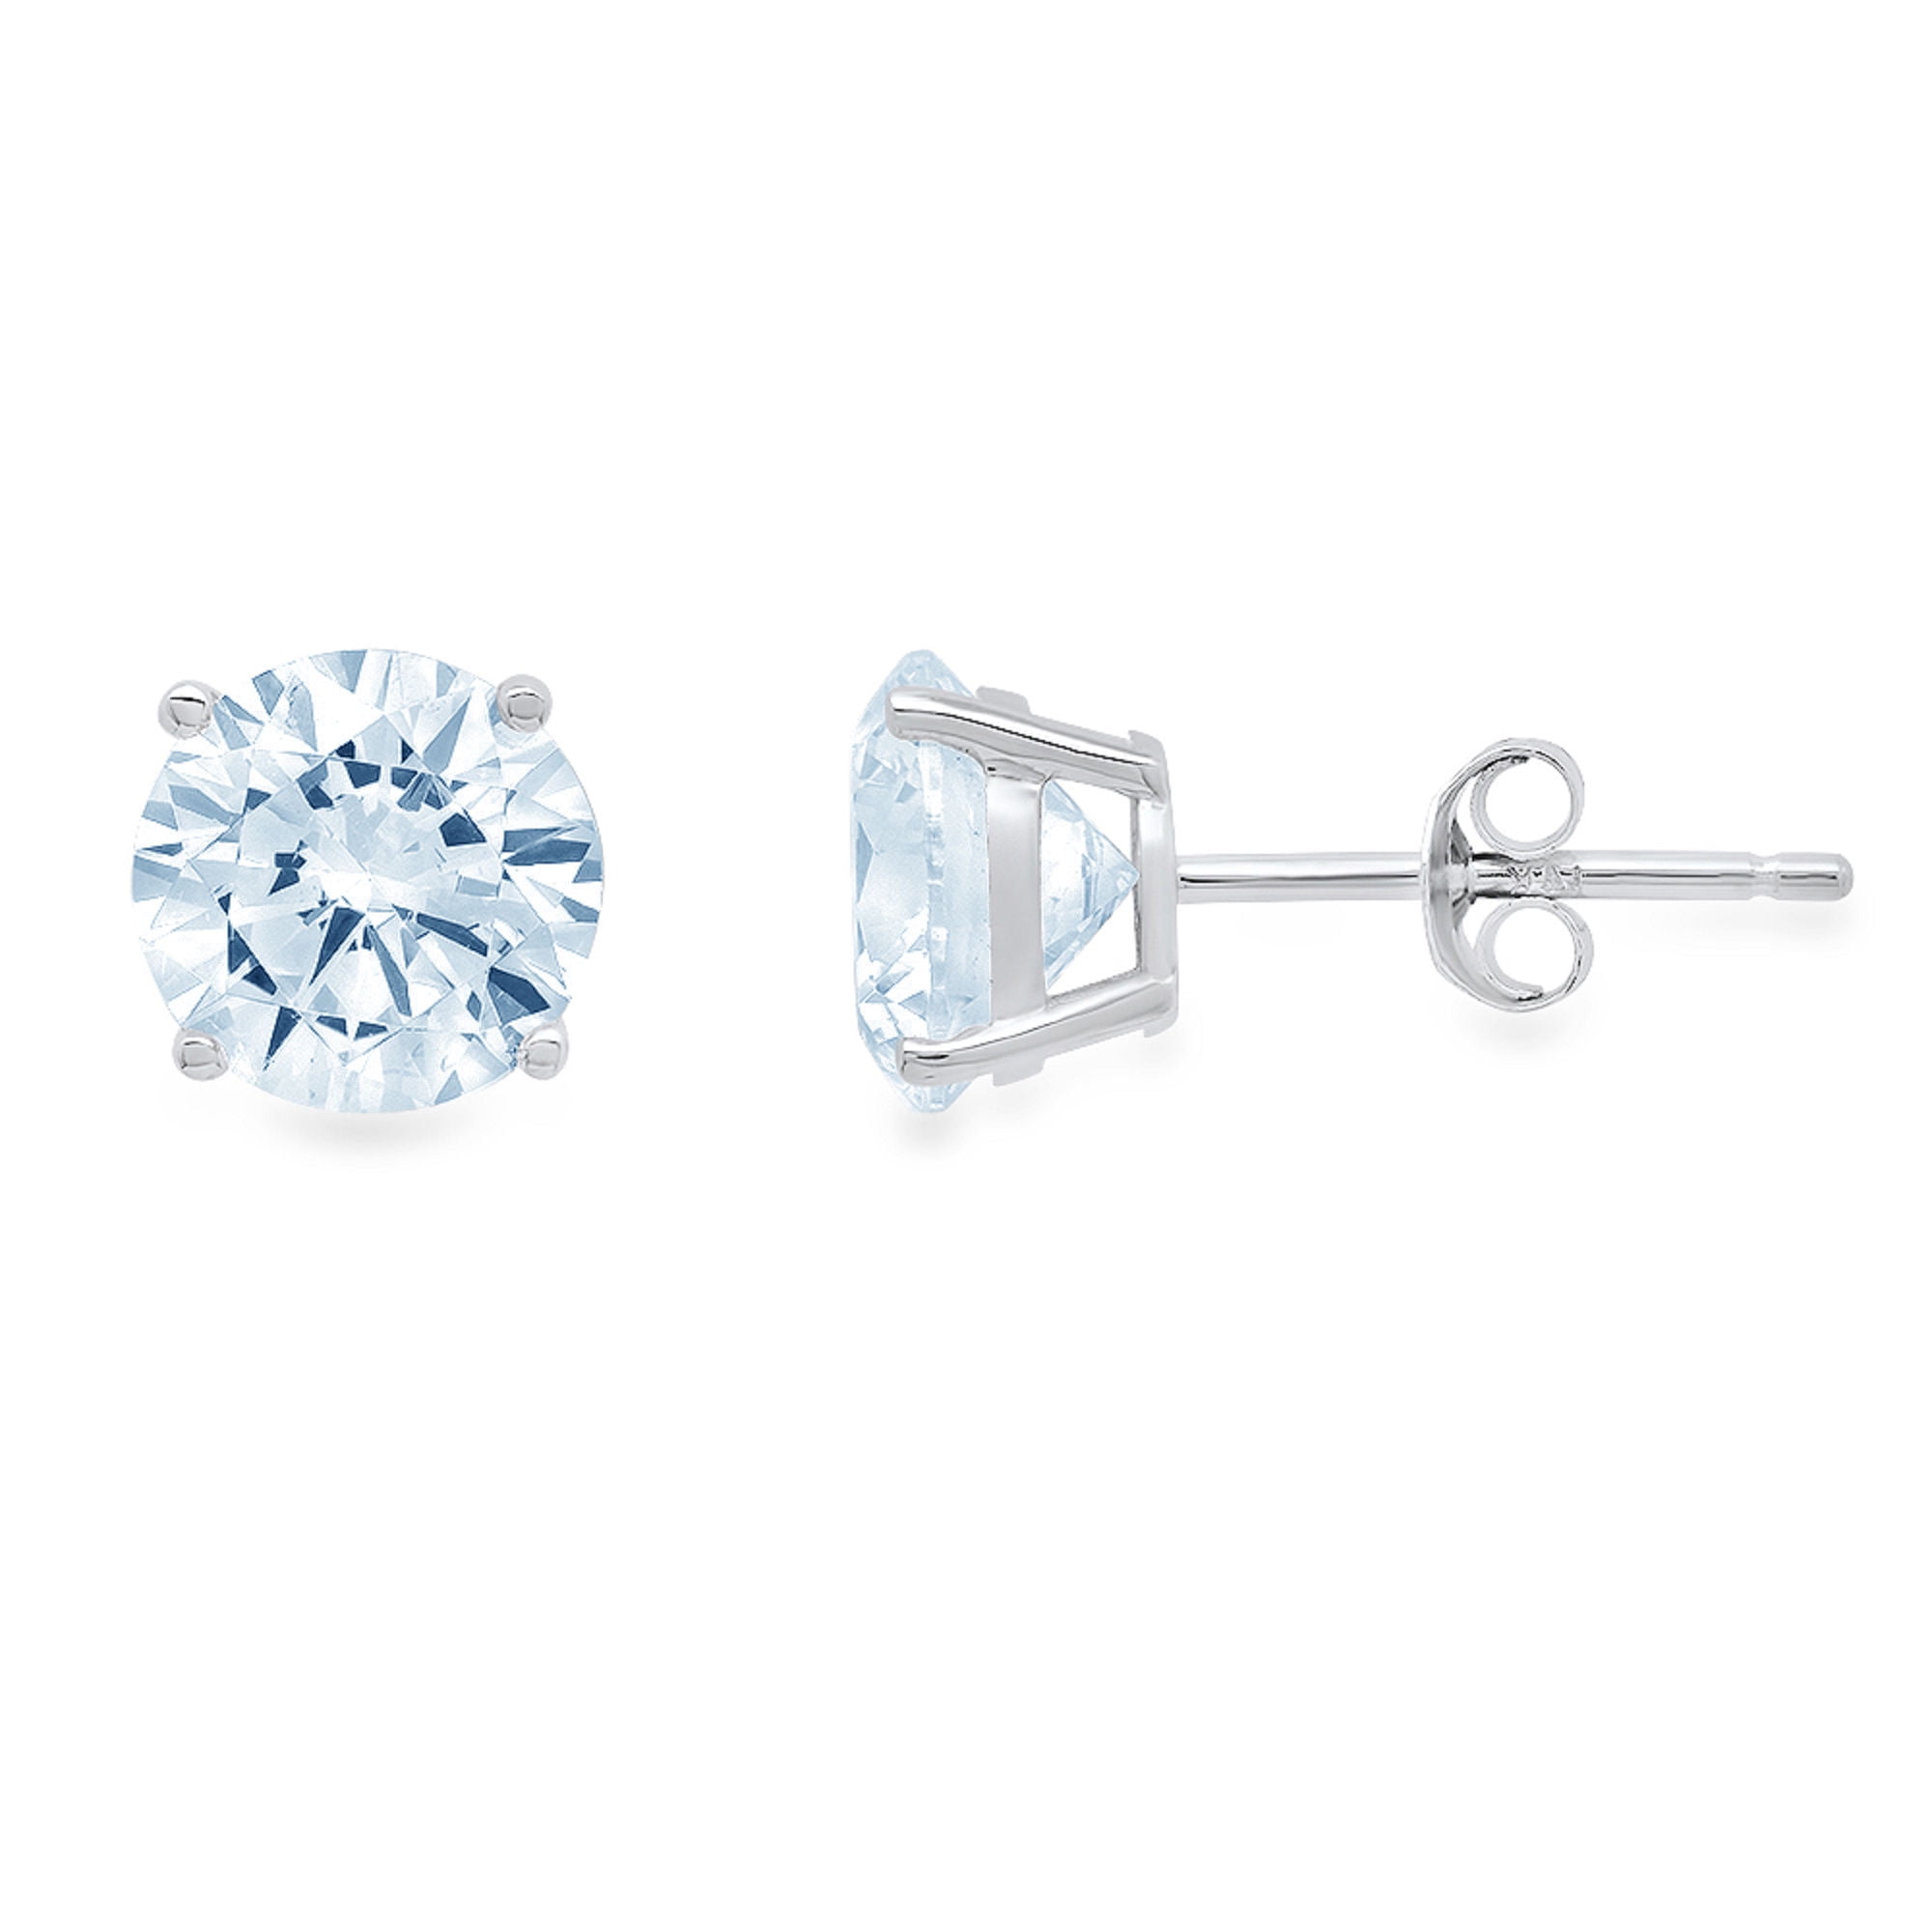 Details about   0.50 ct Round Cut Natural Sky blue Topaz Stud Earrings 14k White Gold Push Back 